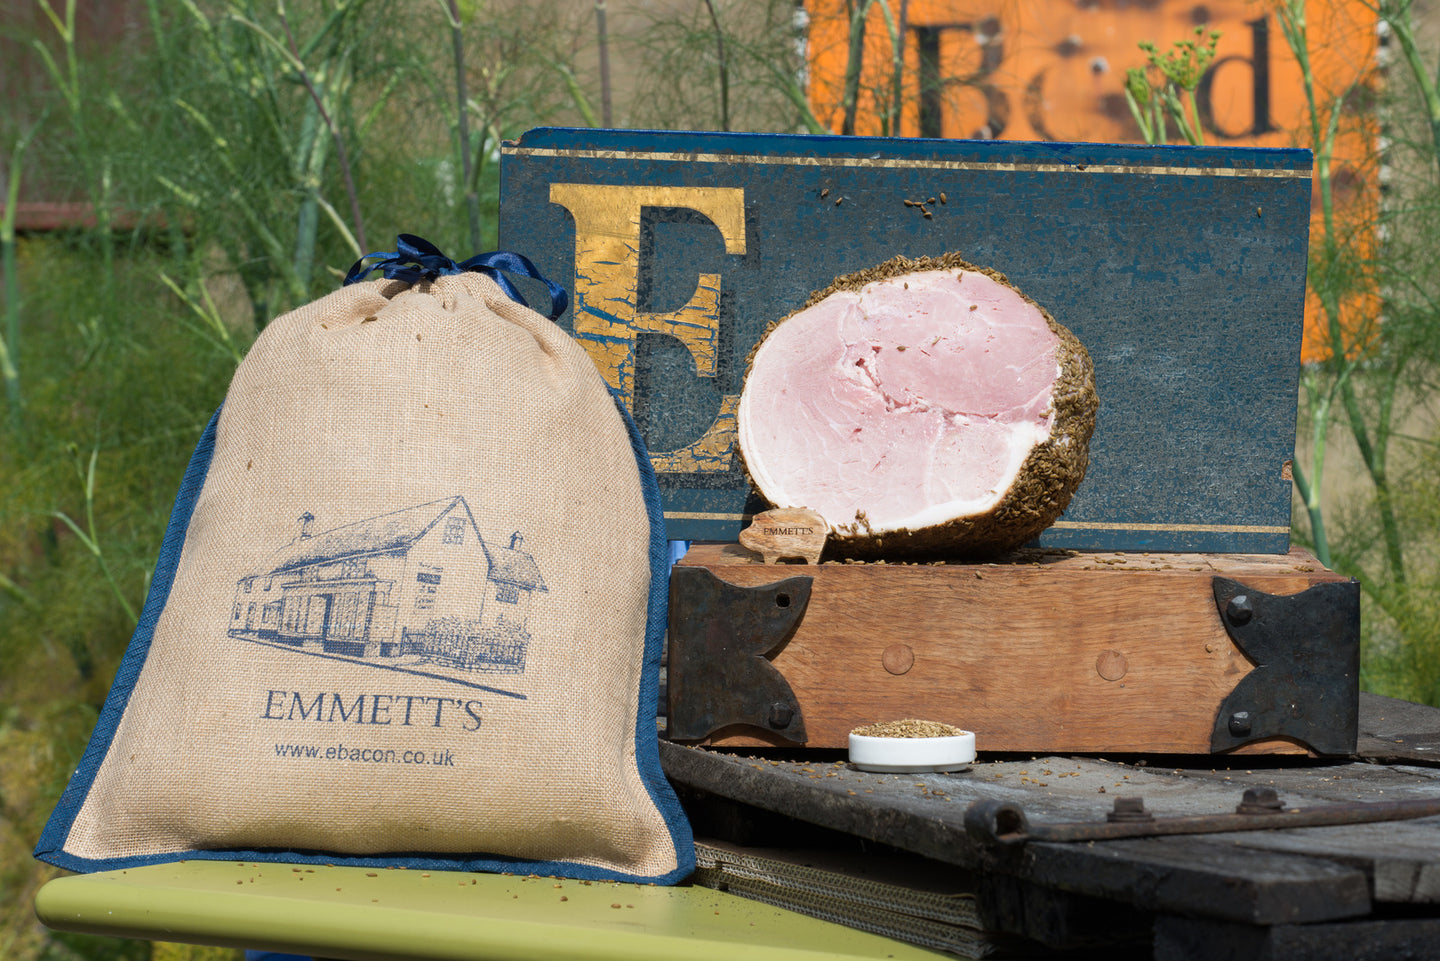 Fennel Seed Unsmoked Cooked Ham Off The Bone - Emmett's